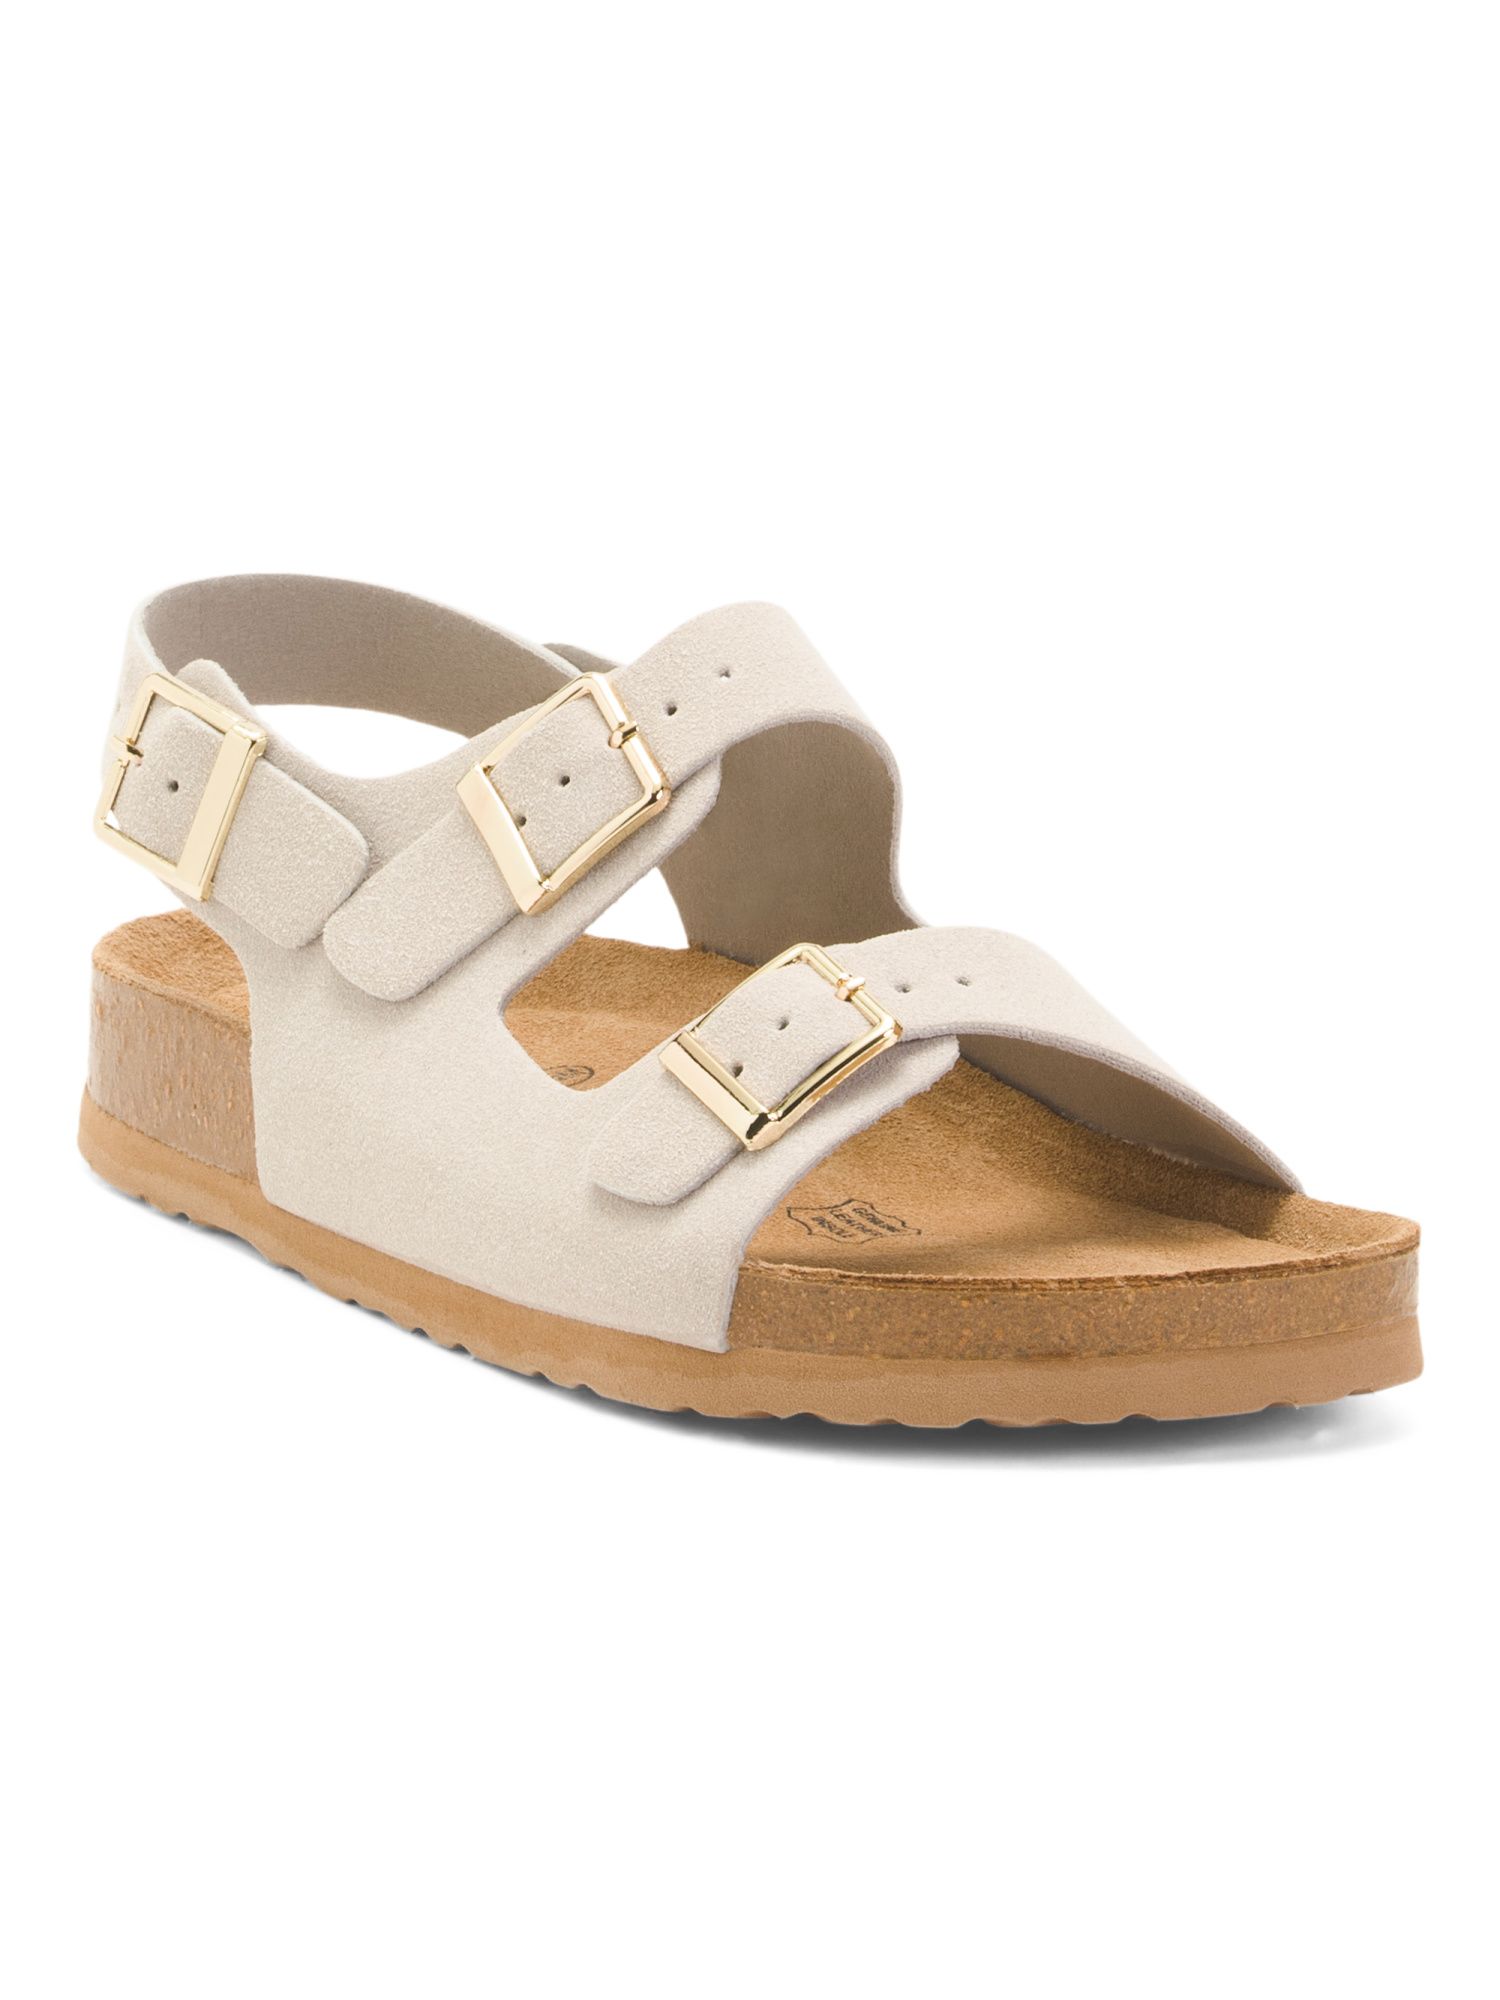 Double Buckle Ankle Strap Sandals | Women's Shoes | Marshalls | Marshalls